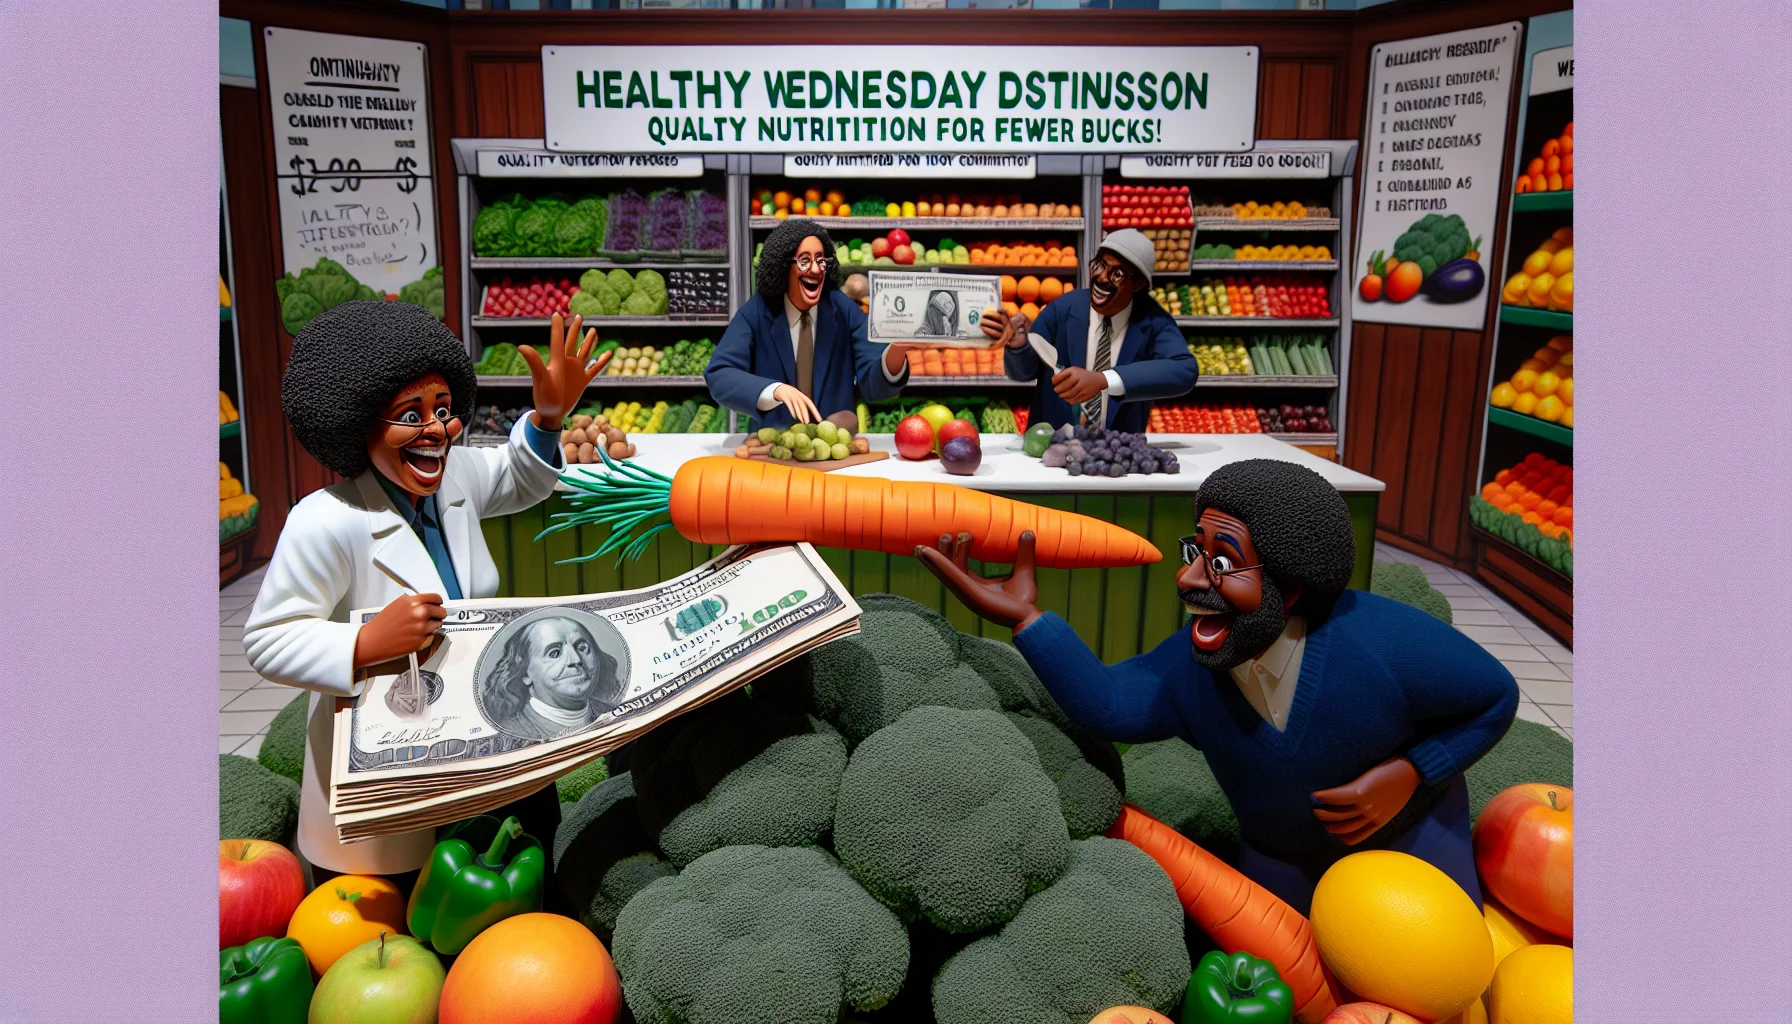 Imagine a comical scene taking place in a bustling supermarket. The backdrop is filled with fresh produce, displaying bright, colorful fruits and vegetables. In the foreground, two individuals are animatedly discussing healthy food choices. One person, a Caucasian woman with a sense of humor, is holding up a broccoli and a bundle of dollar bills, while an amused Black man is tickling a giant carrot with a feather, symbolizing its affordability. The placard in the background reads, 'Healthy Wednesday Discussion Continuation - Quality nutrition for fewer bucks!'. This whole setup suggests eating healthy is both fun and economical.